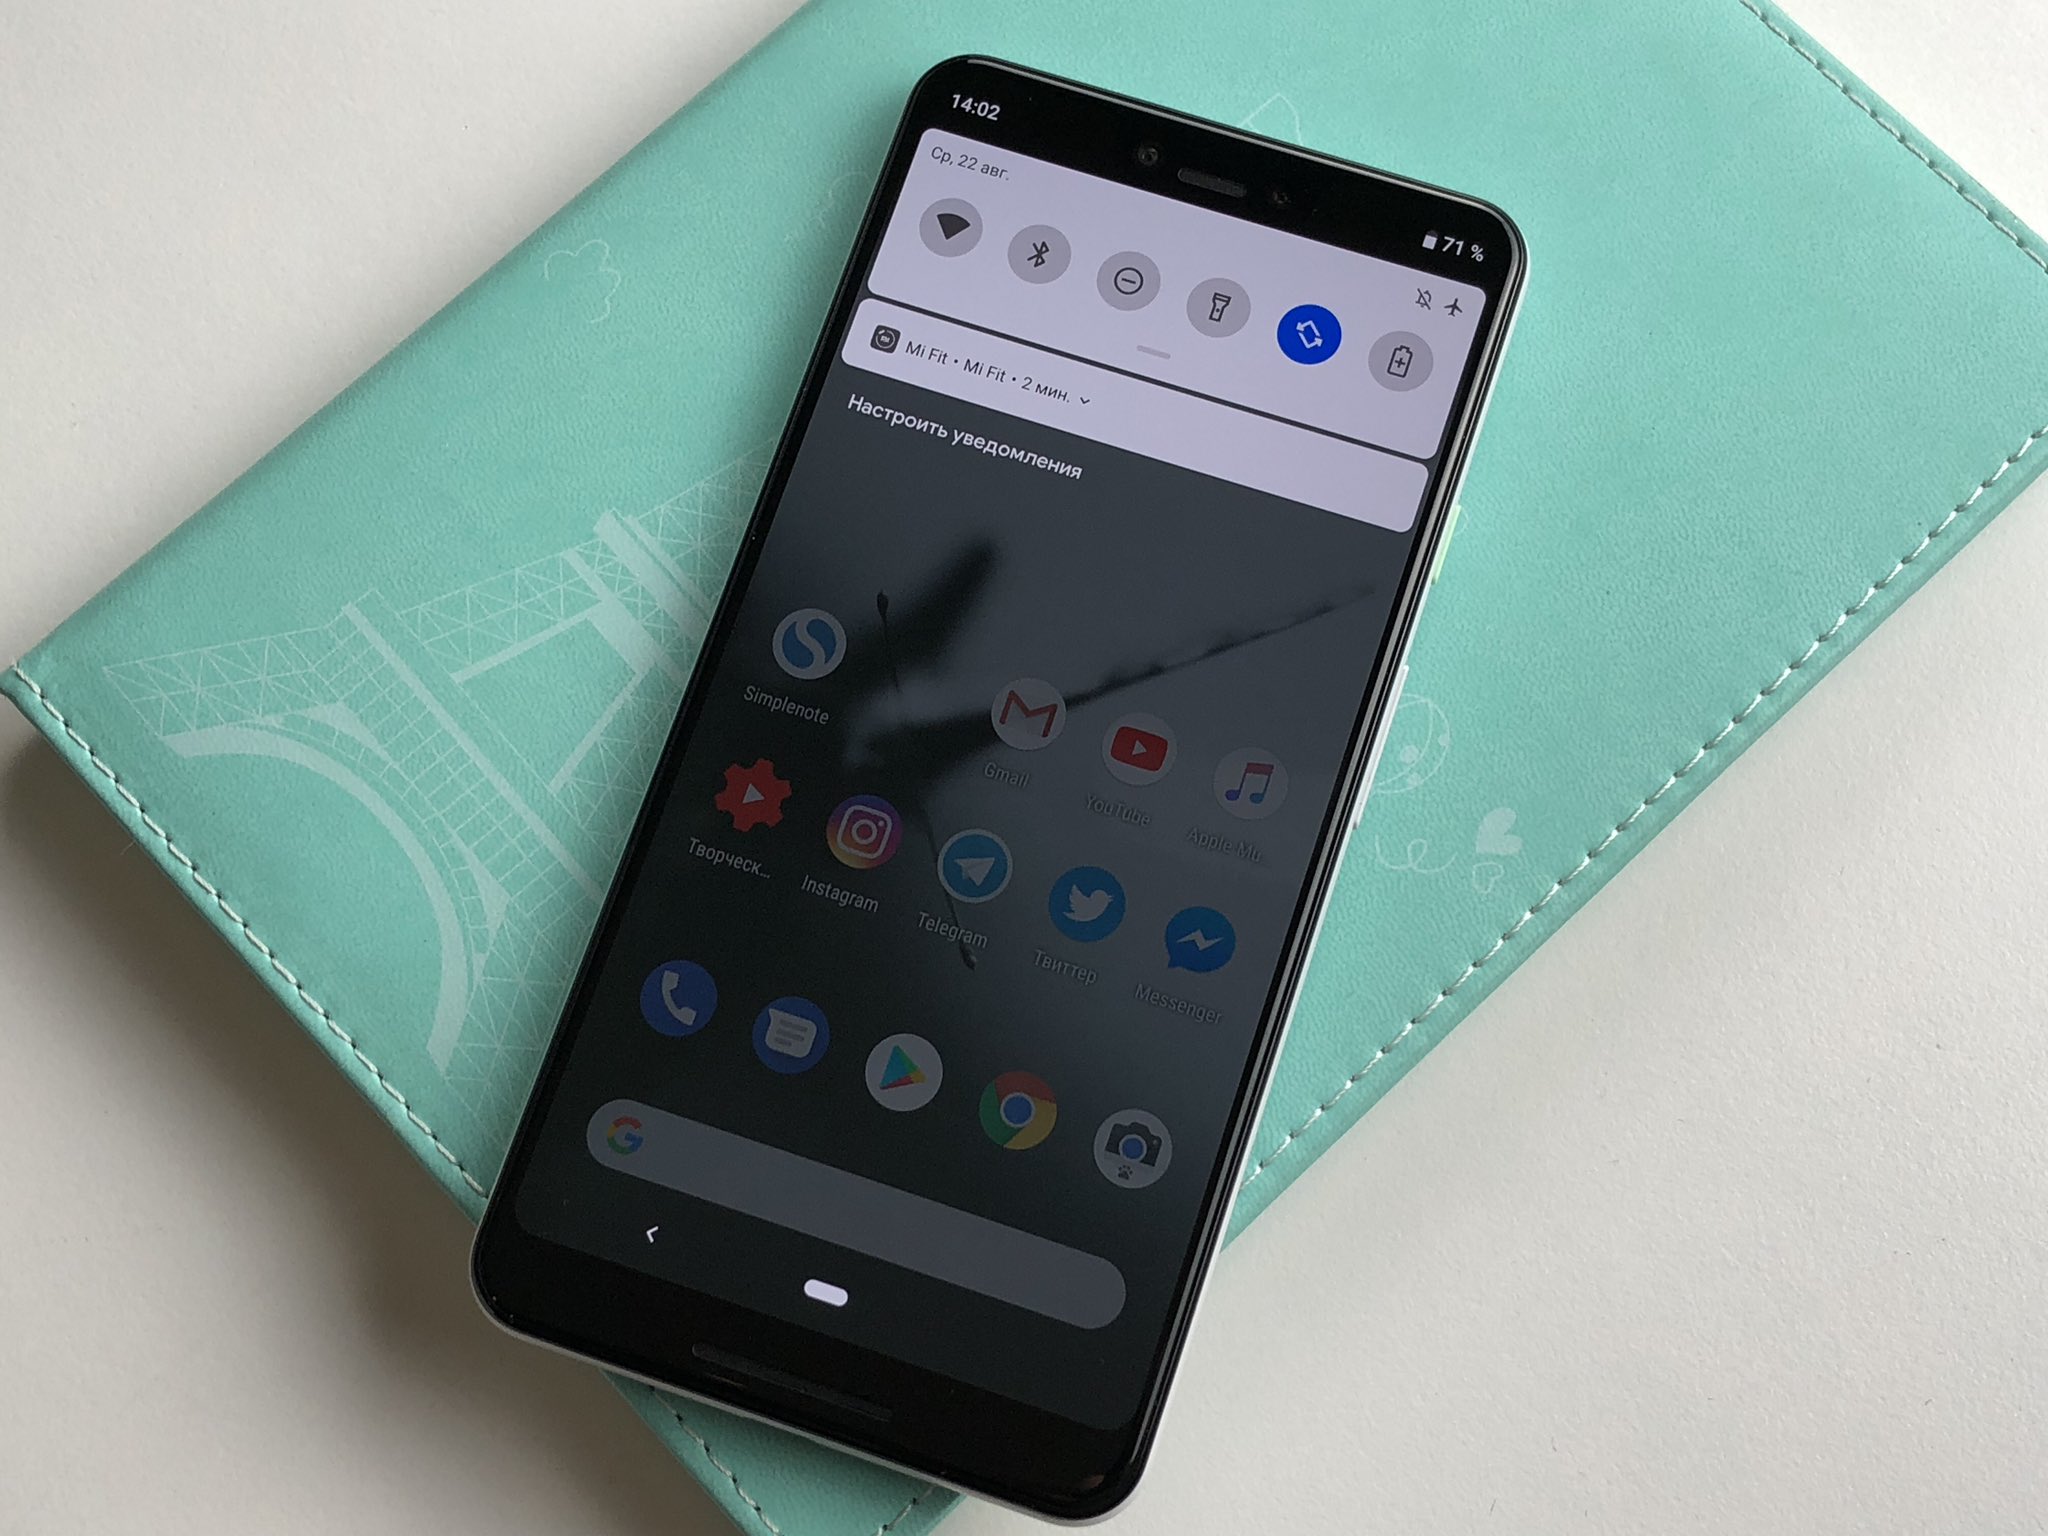 Leaked images of the Google Pixel 3 XL.